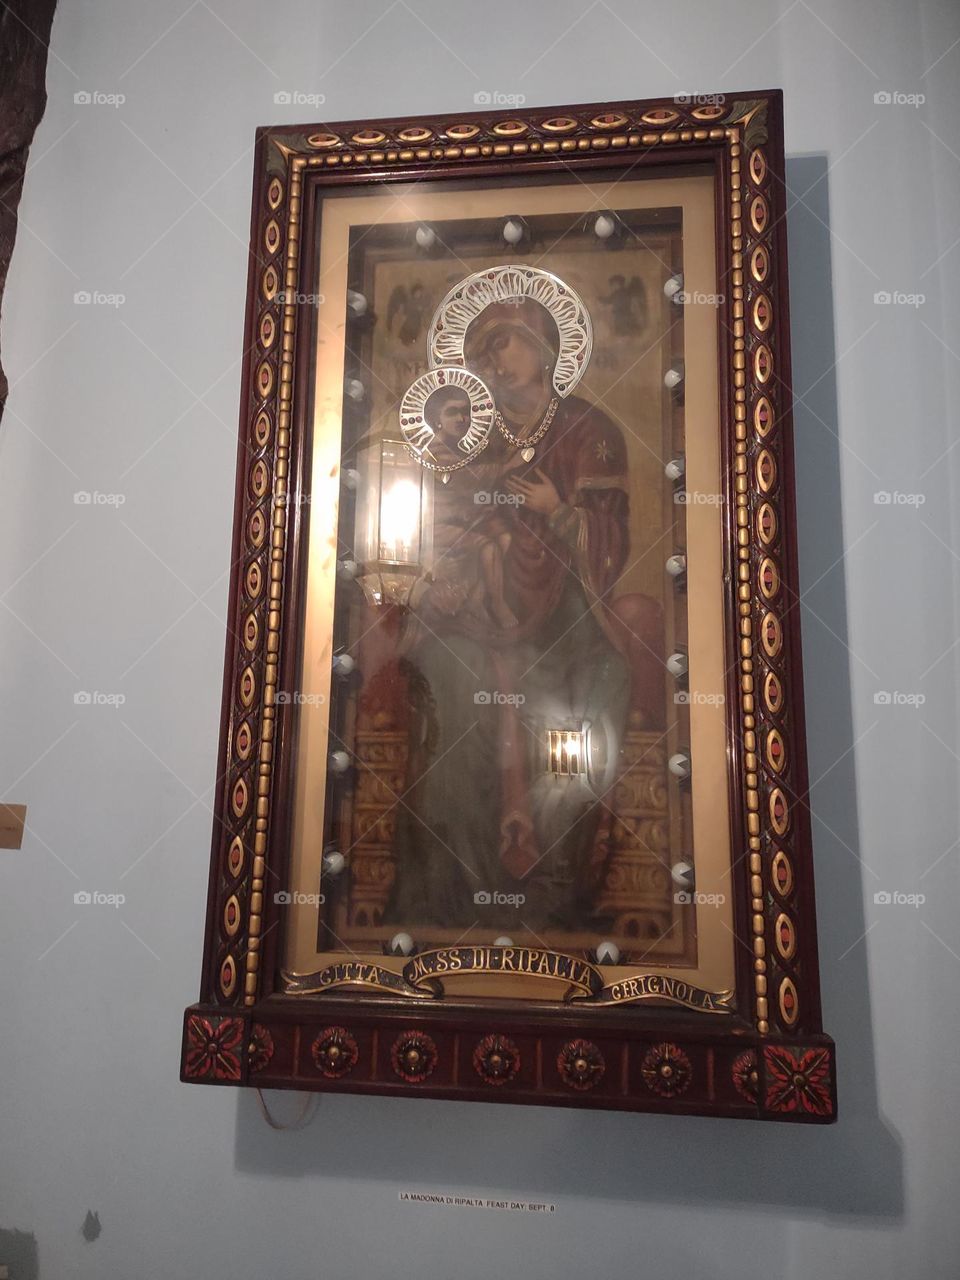 Madonna and Child icon. This painting is more in the Eastern style